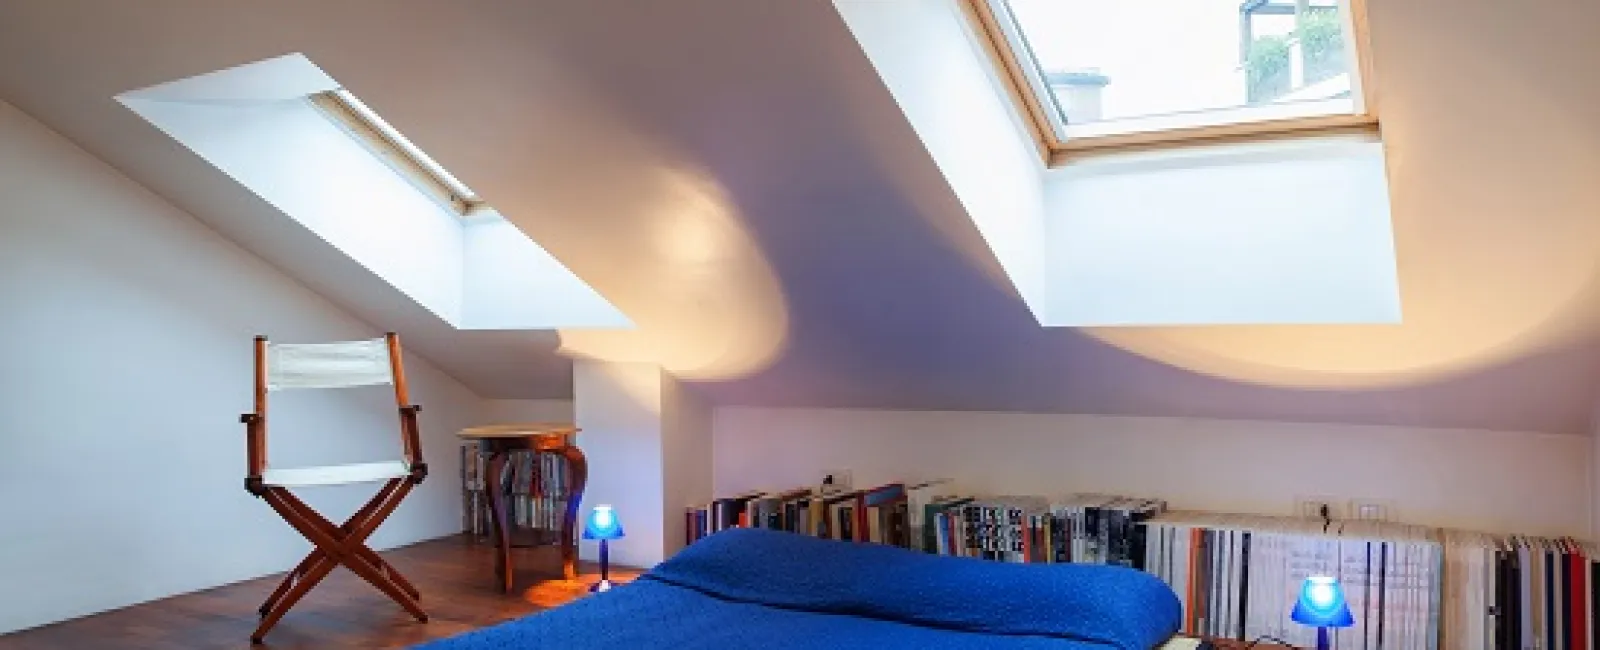 All You Need to Know about Getting a Skylight Installed